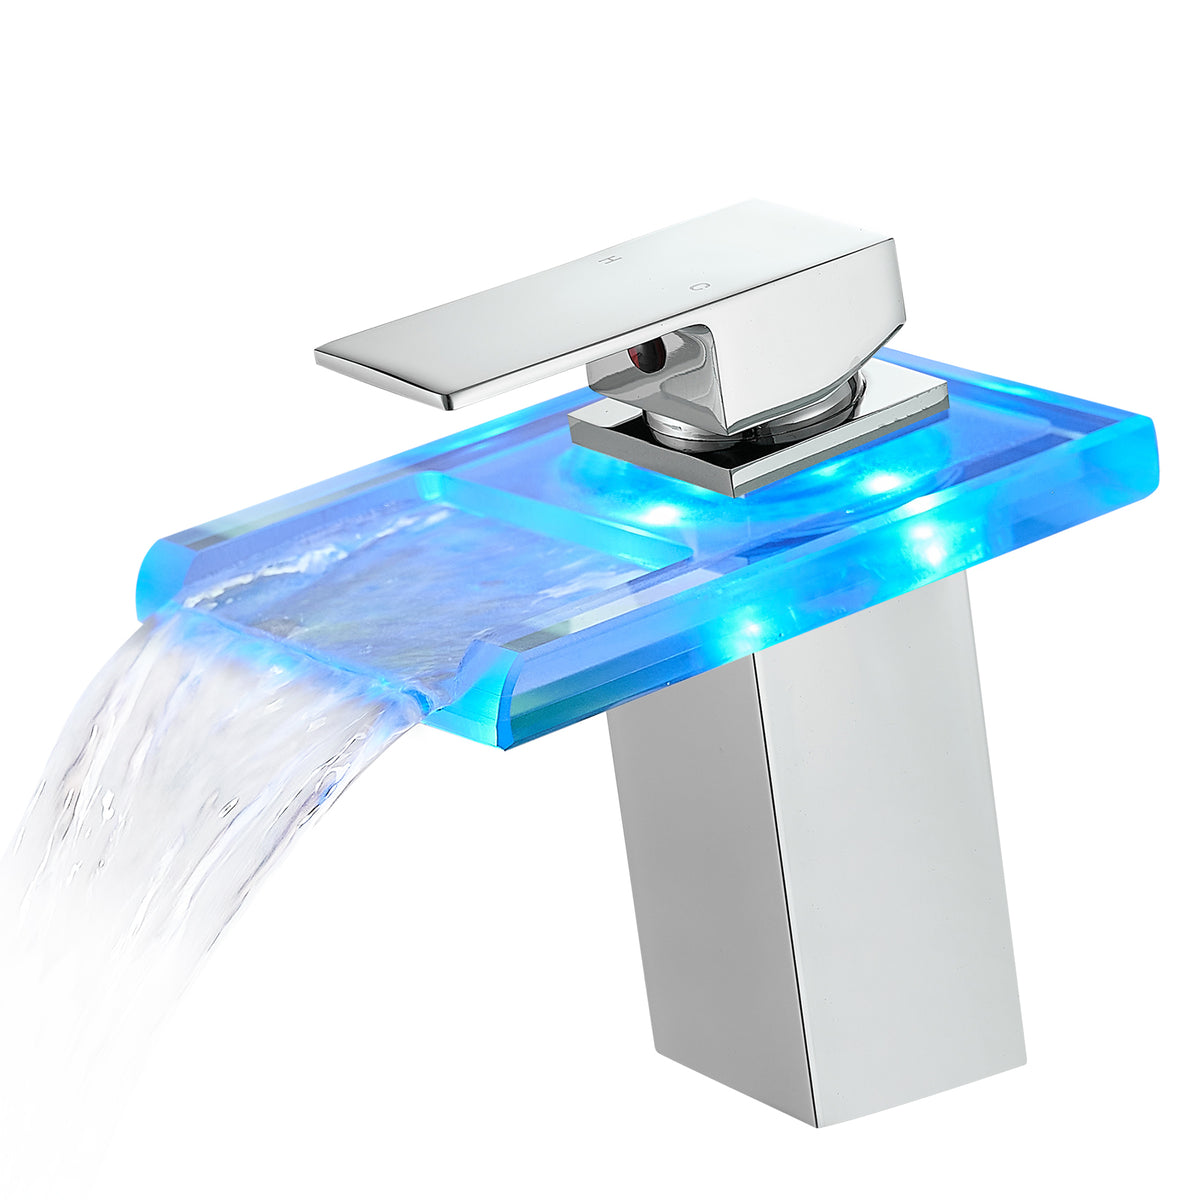 Bathroom Sink Faucet LED Light 3 Colors Changing Waterfall Glass Spout Hot Cold Water Mixer Single Handle Faucet Black